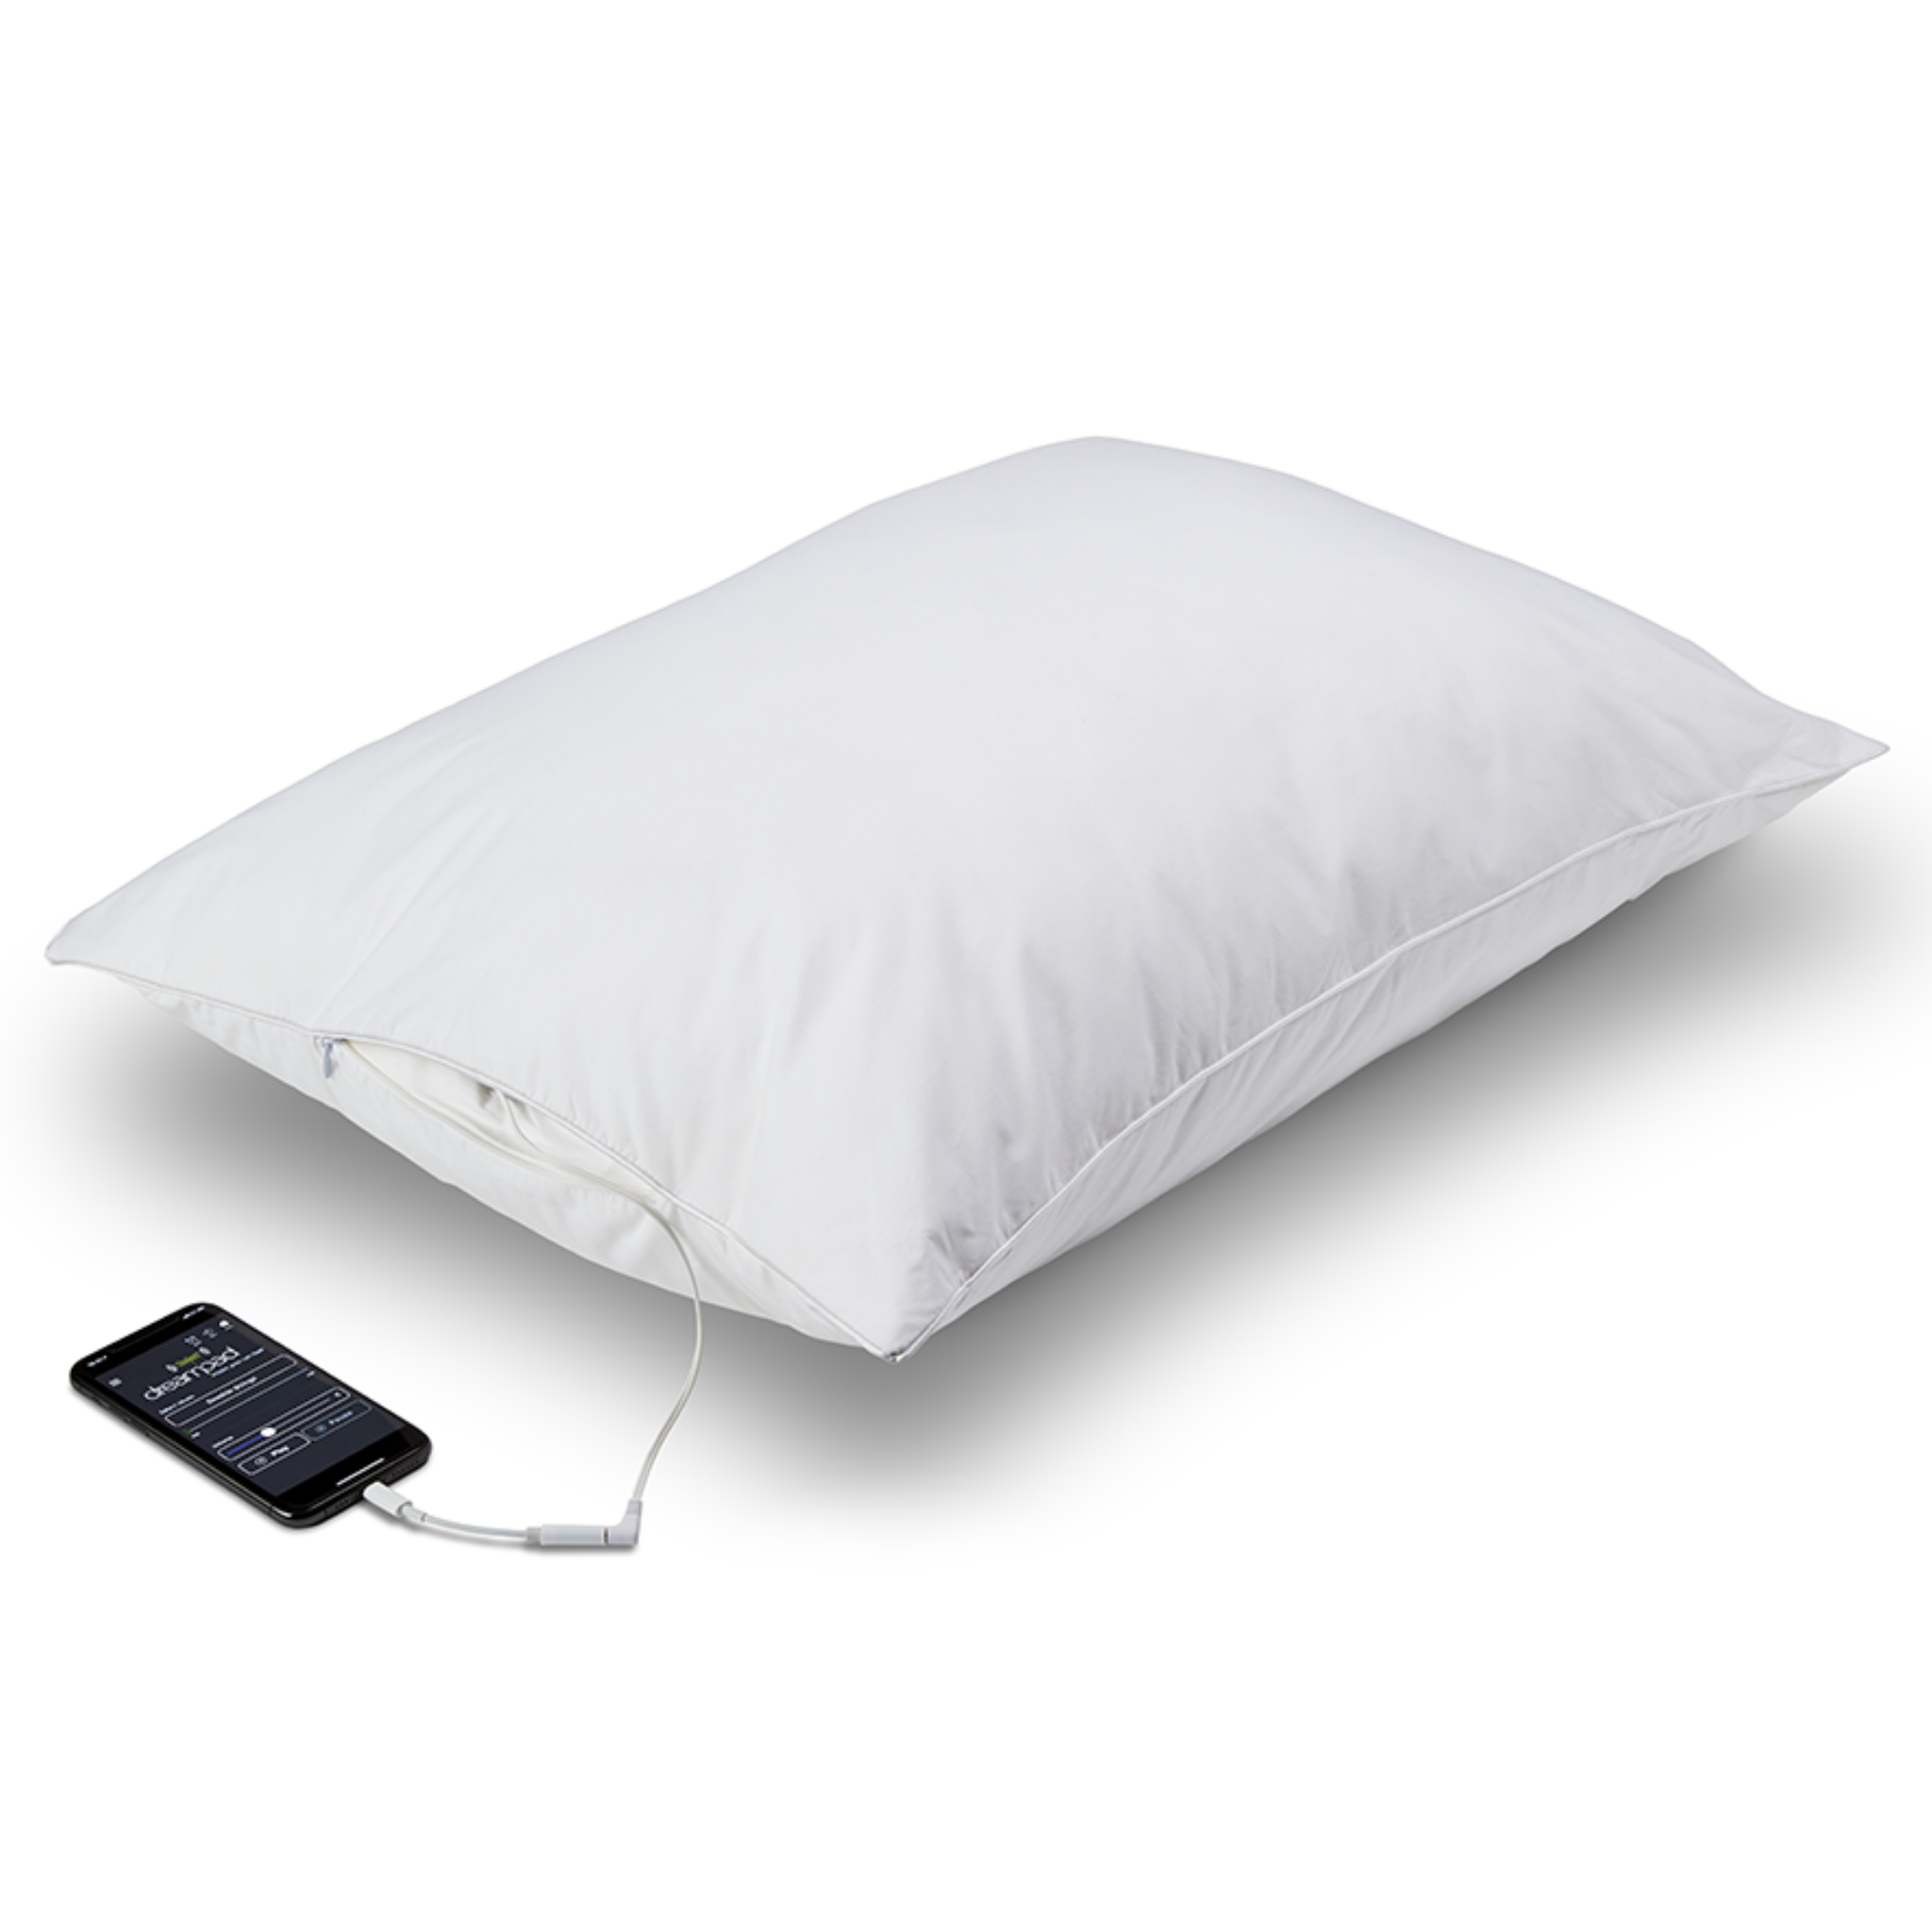 Medium Support Pillow with Bluetooth